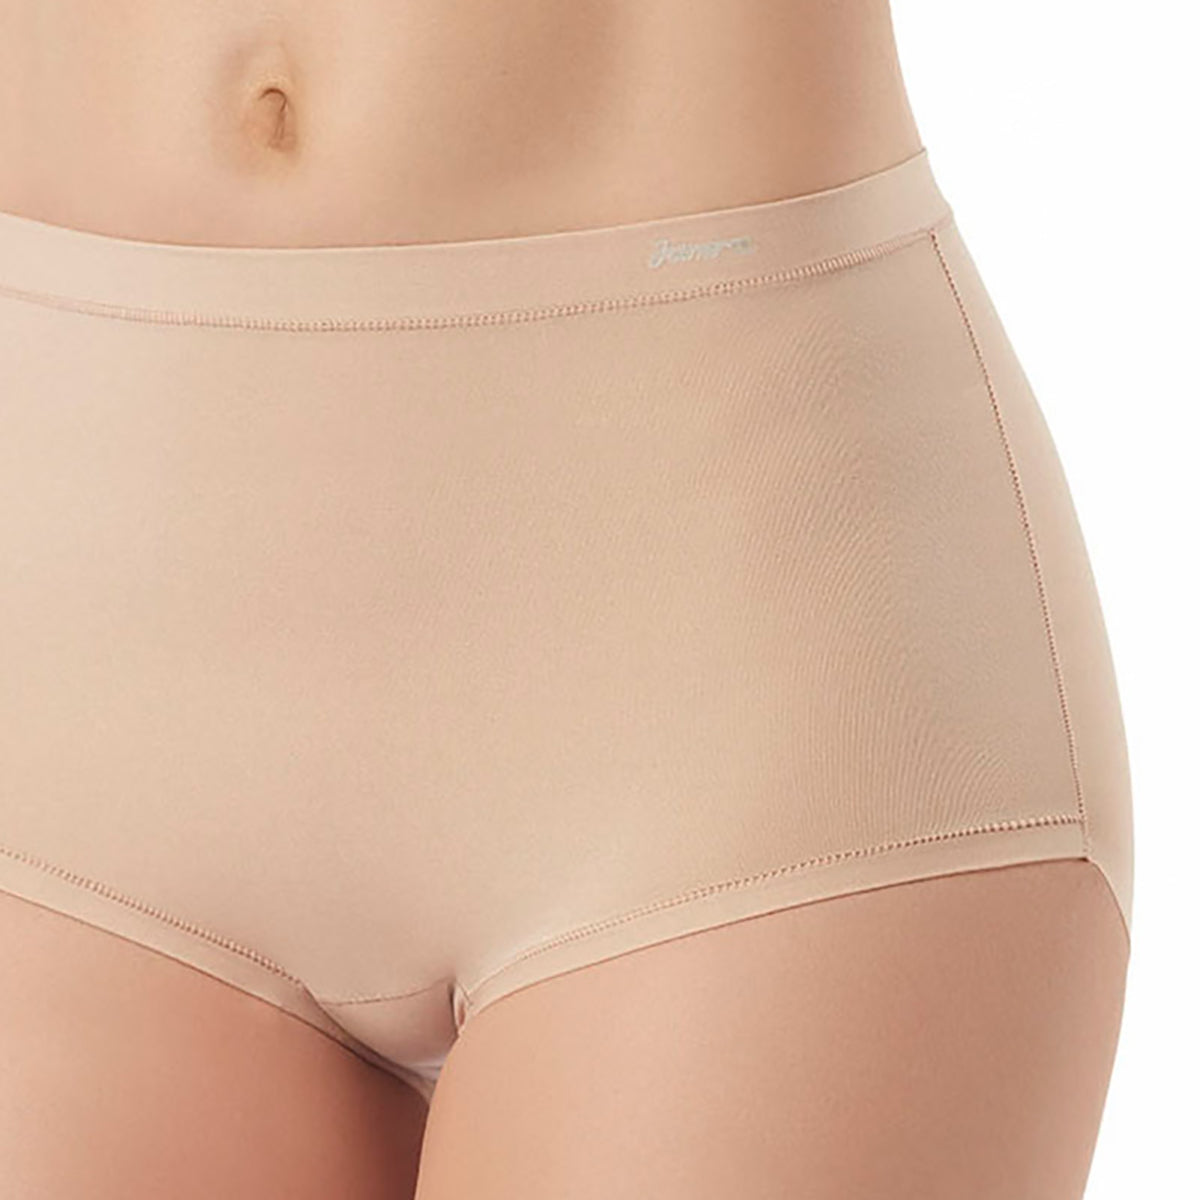 3 Pack of Womens Maxi Briefs (7001 White or Nude) High Waisted